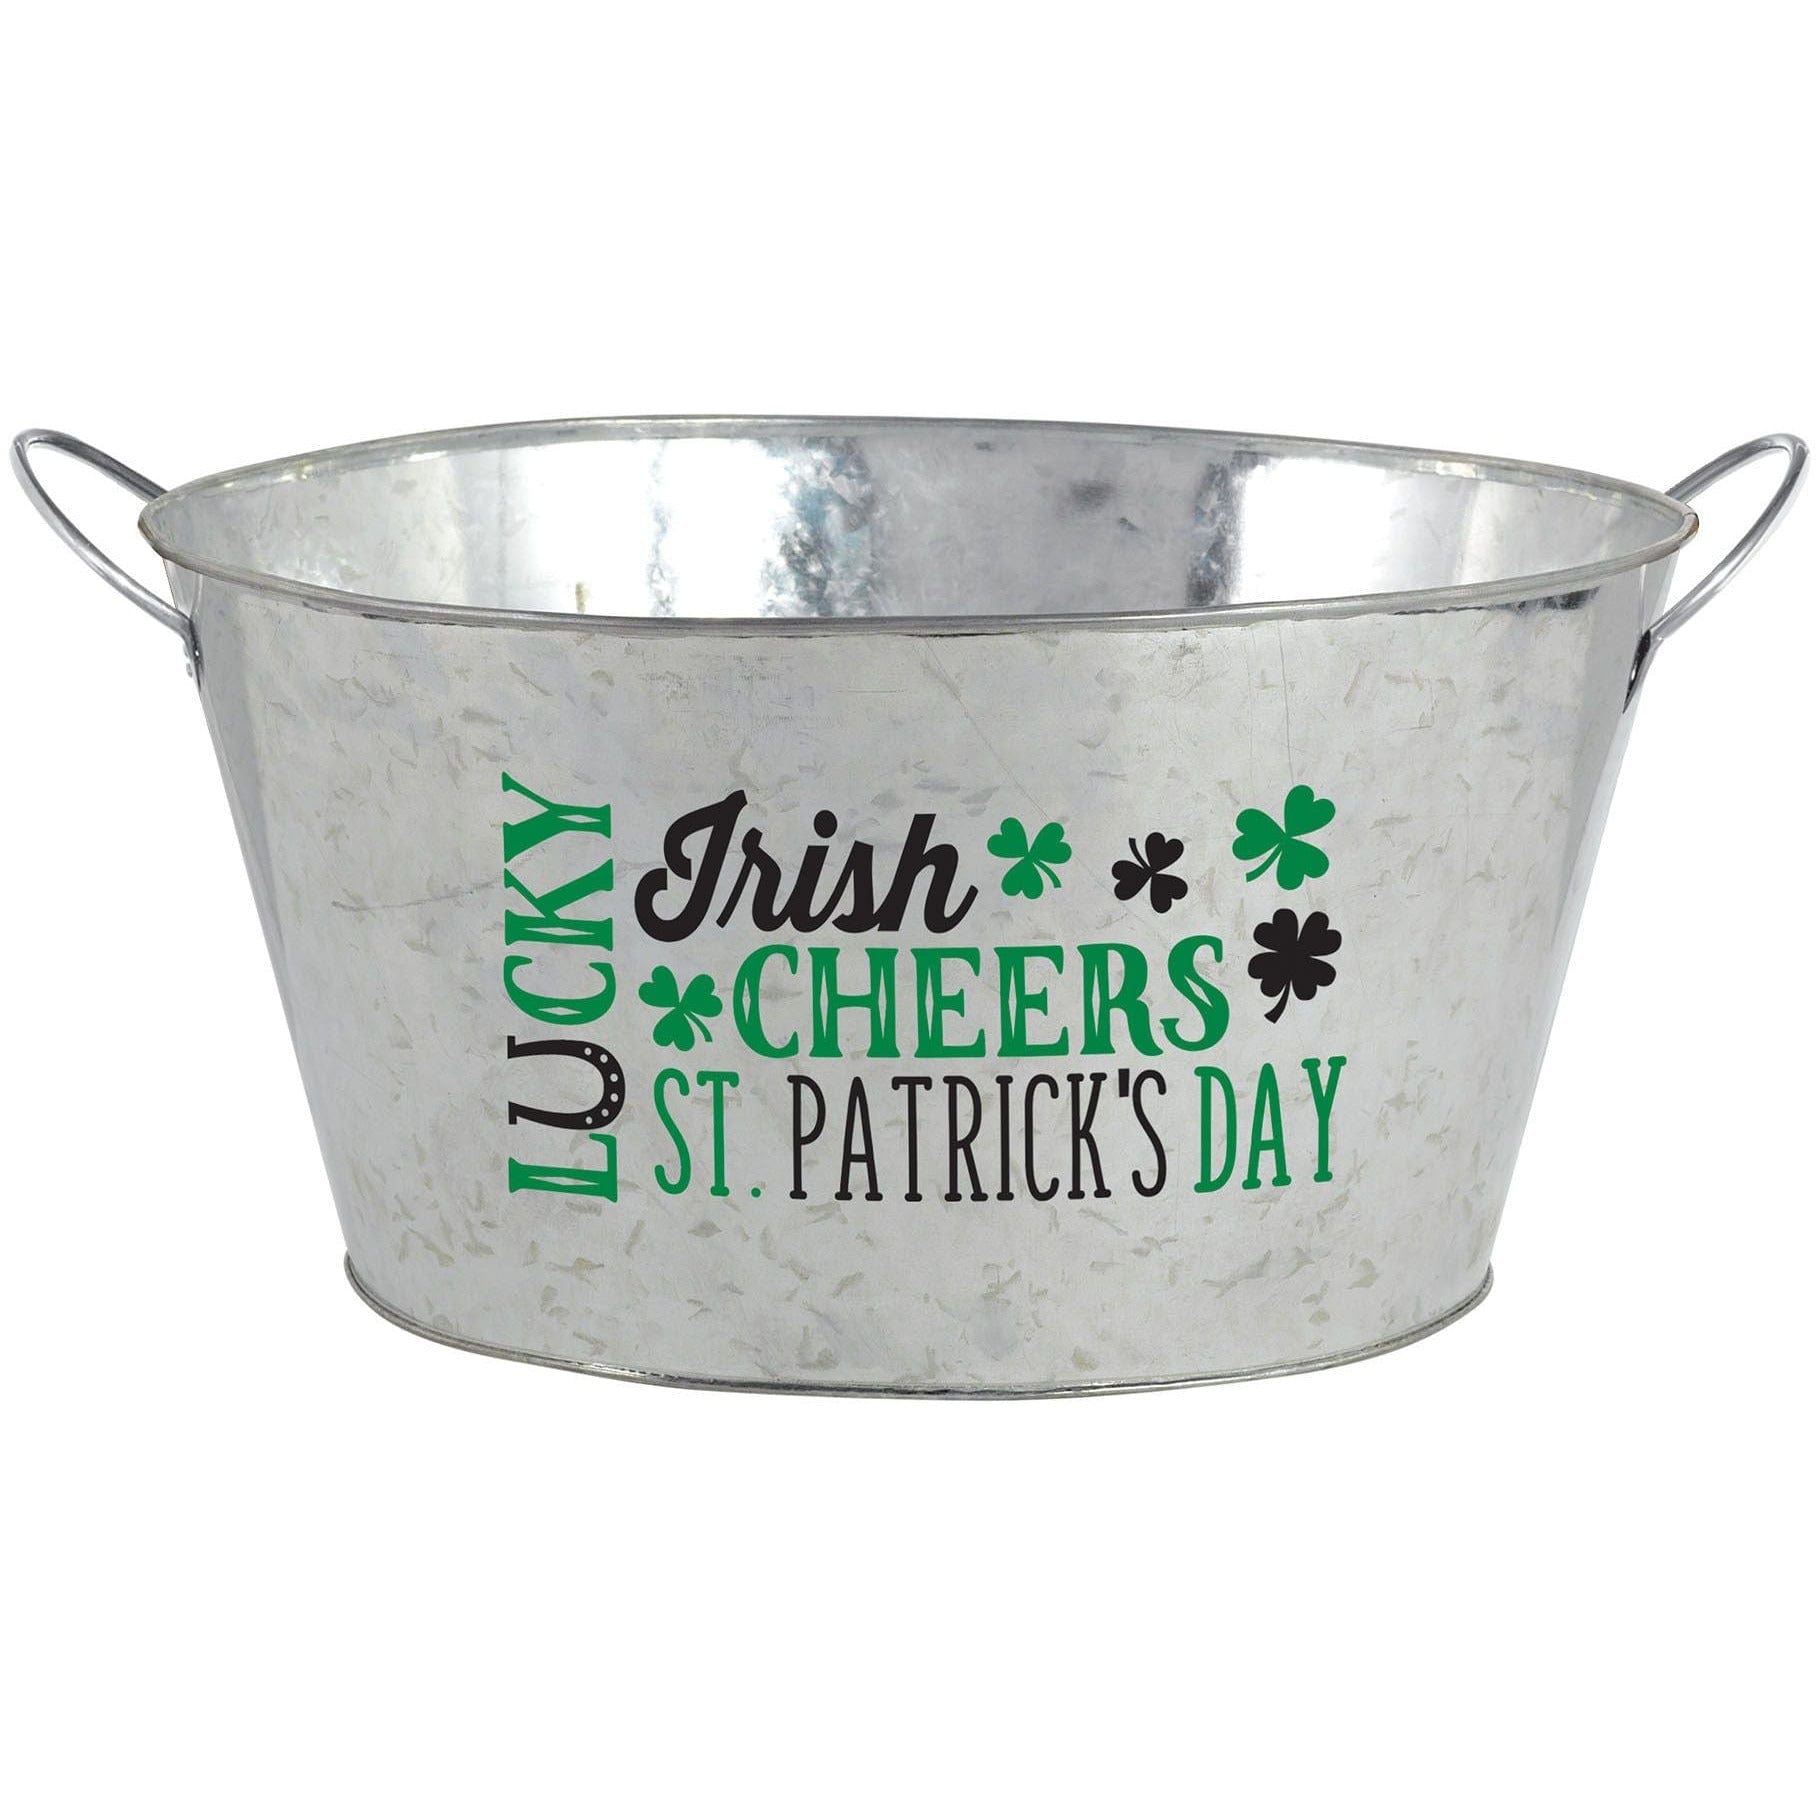 Amscan HOLIDAY: ST. PAT'S St. Patrick's Day Tub